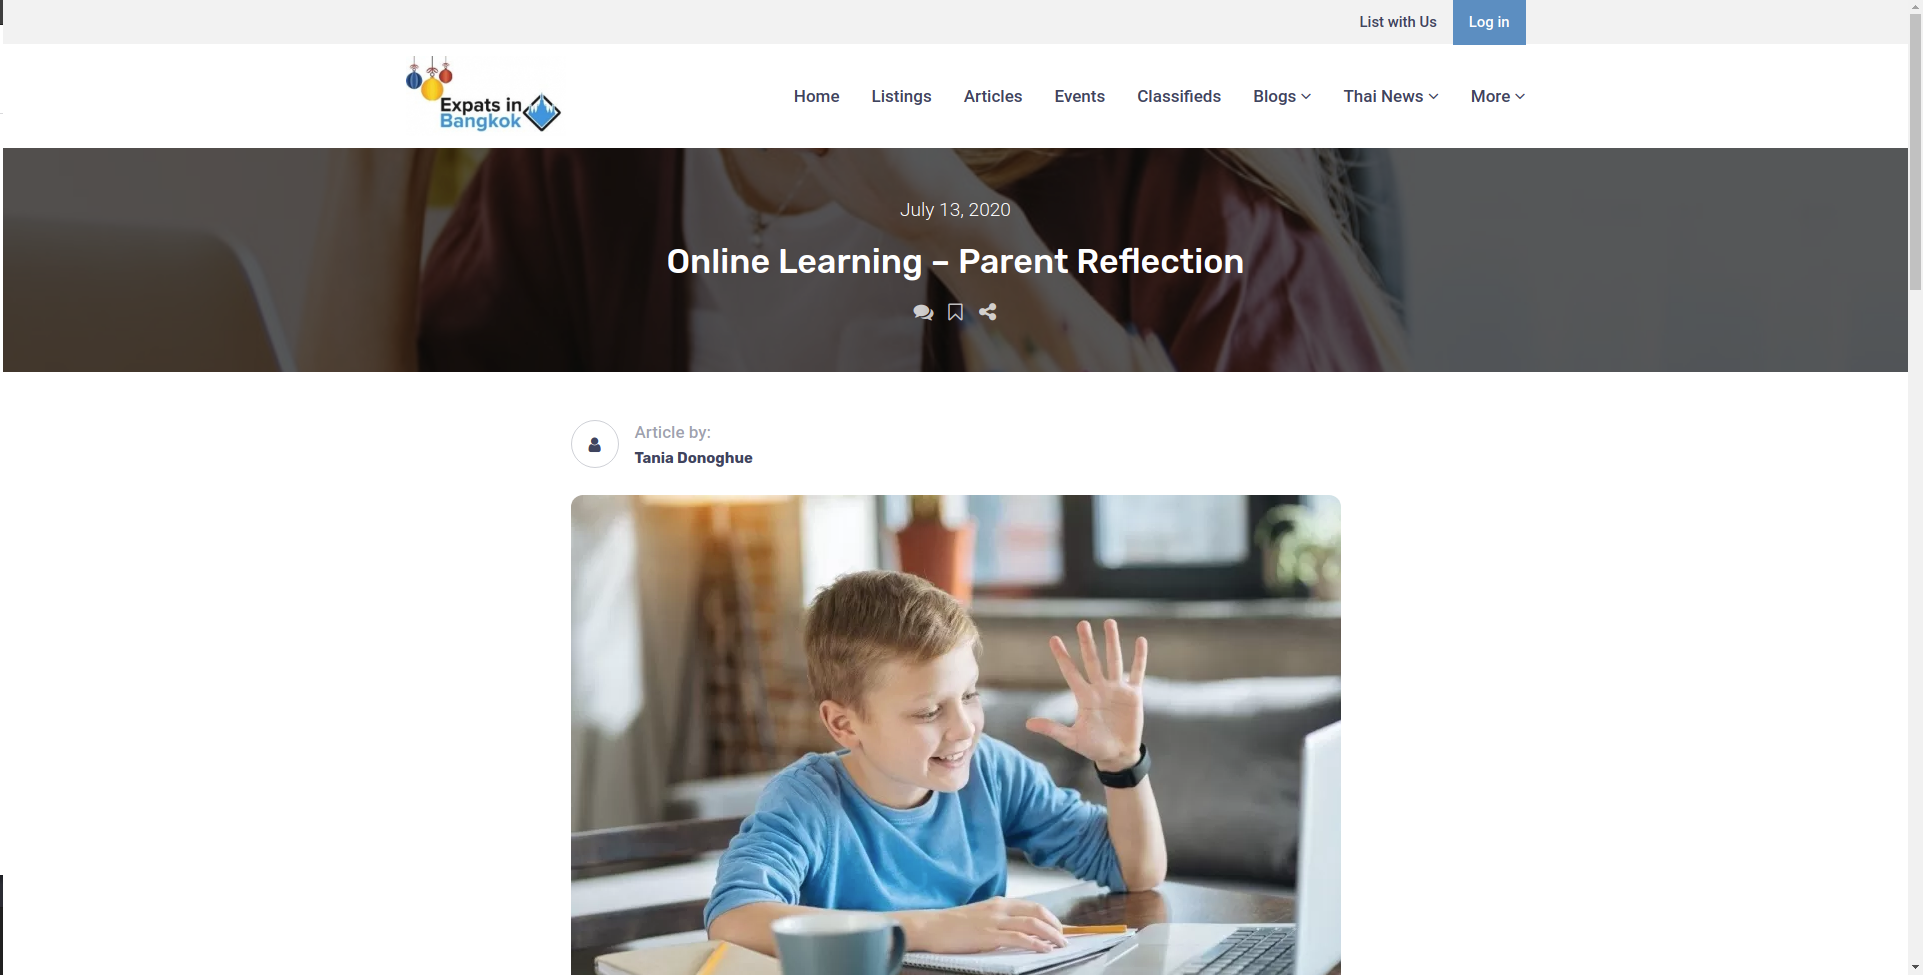 Online Learning; A Parent Reflection